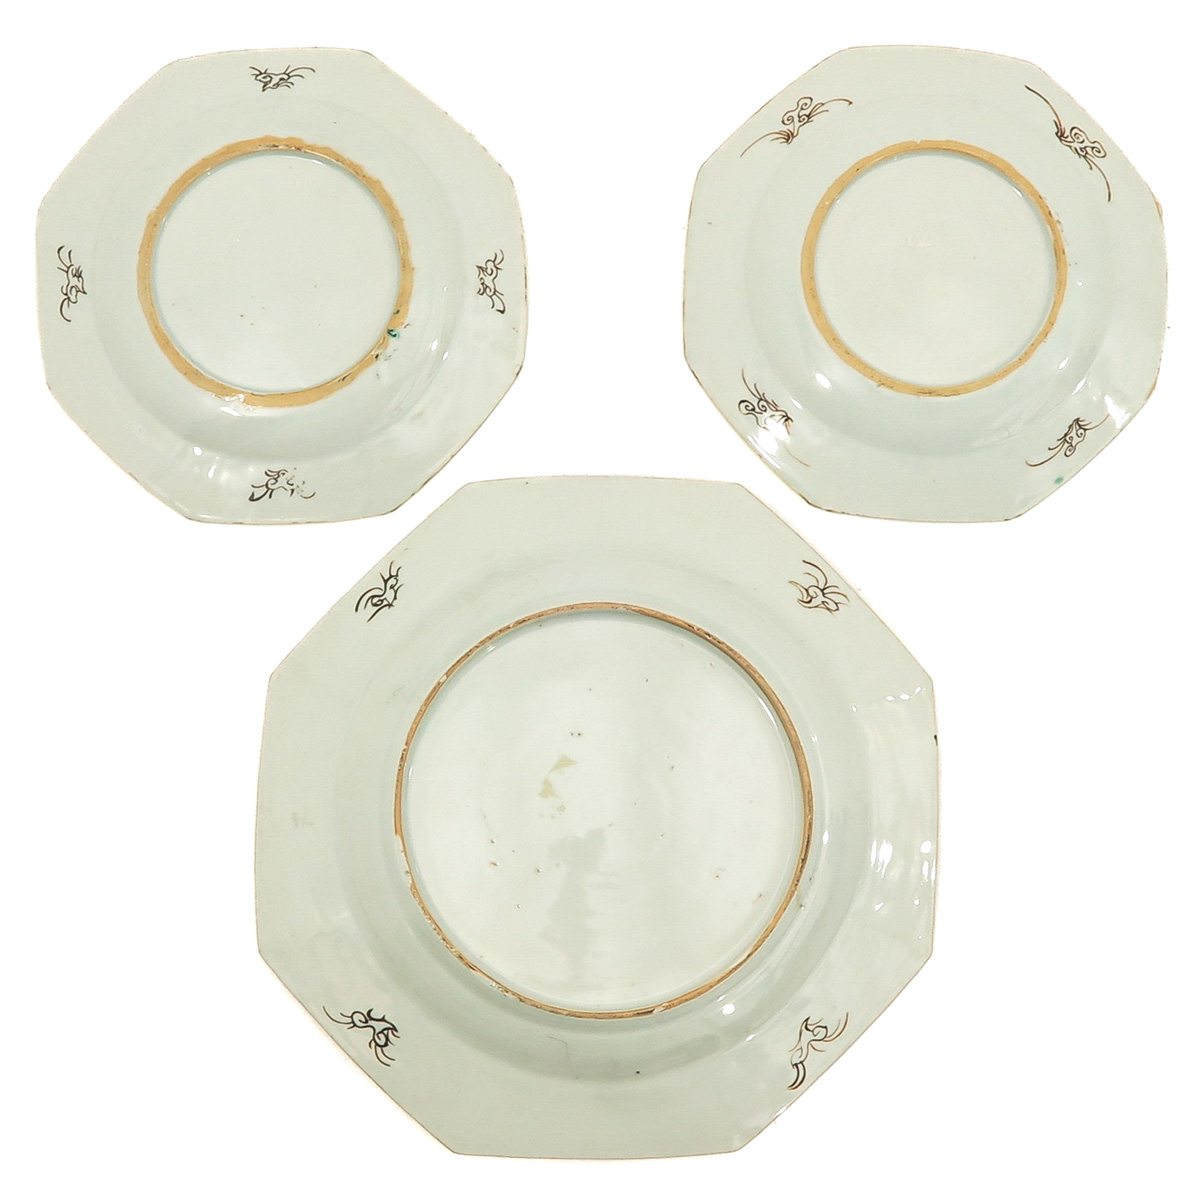 A Series of 3 Famille Rose Plates - Image 2 of 10